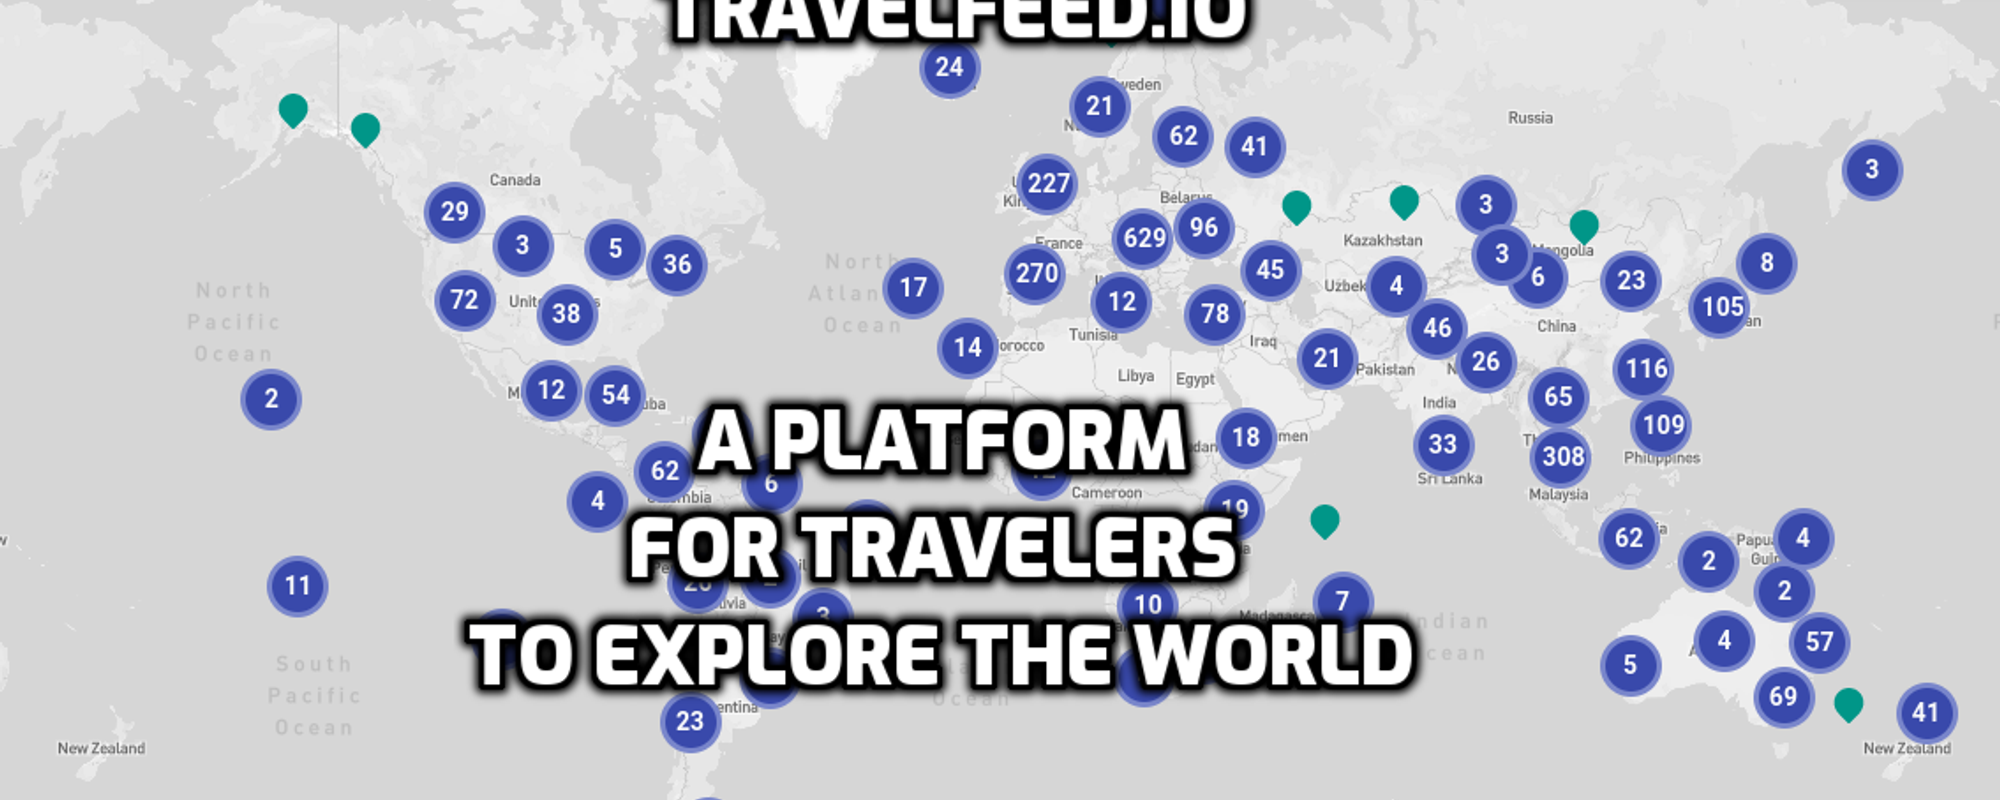 Have you ever tried travelfeed.io ?